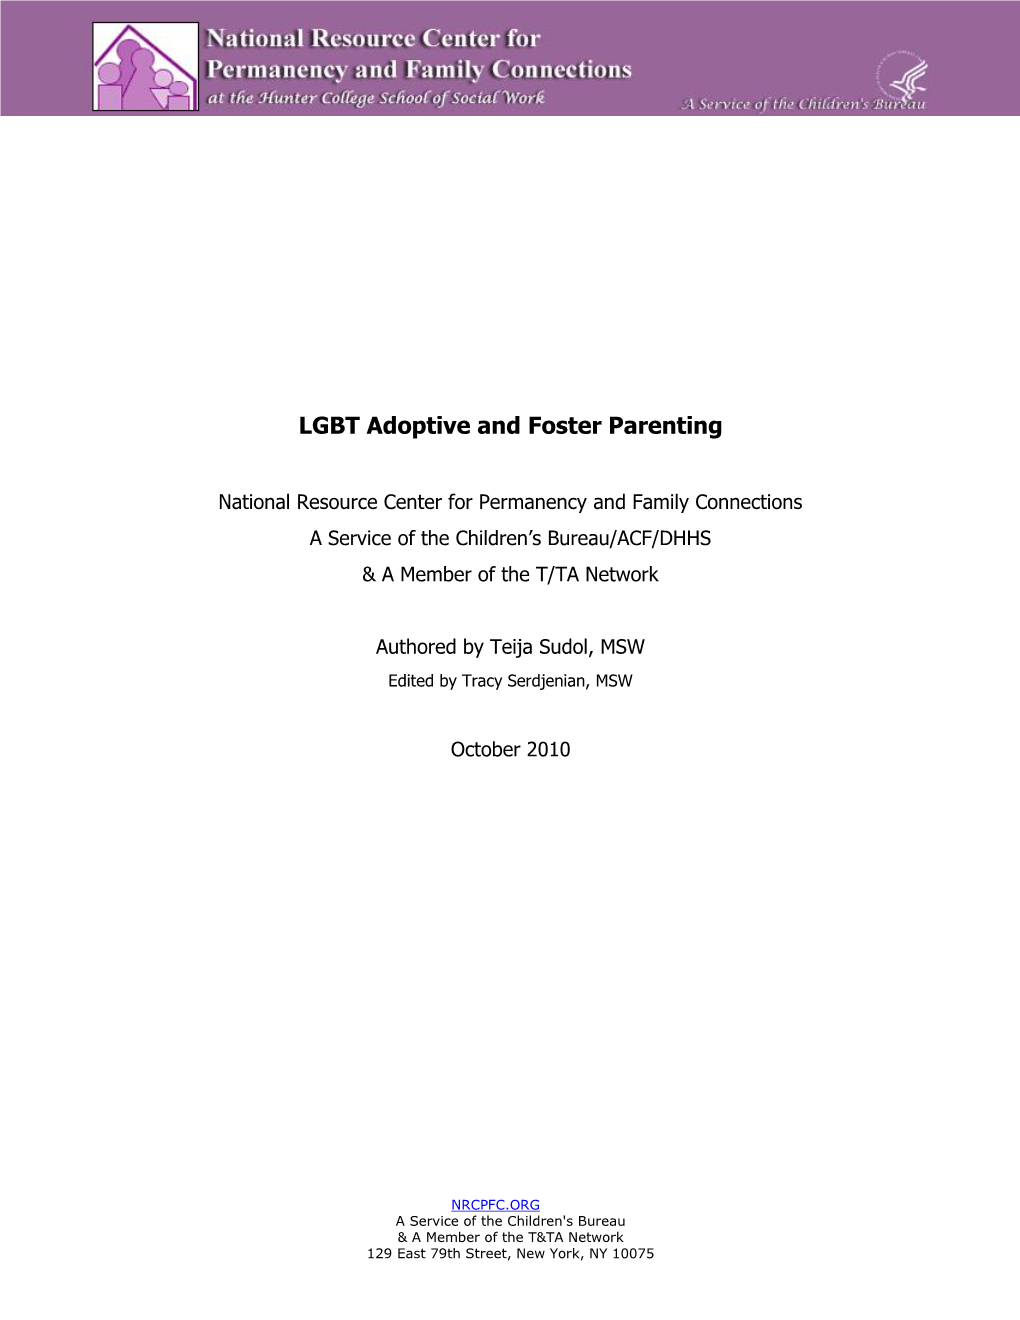 LGBT Adoptive and Foster Parenting